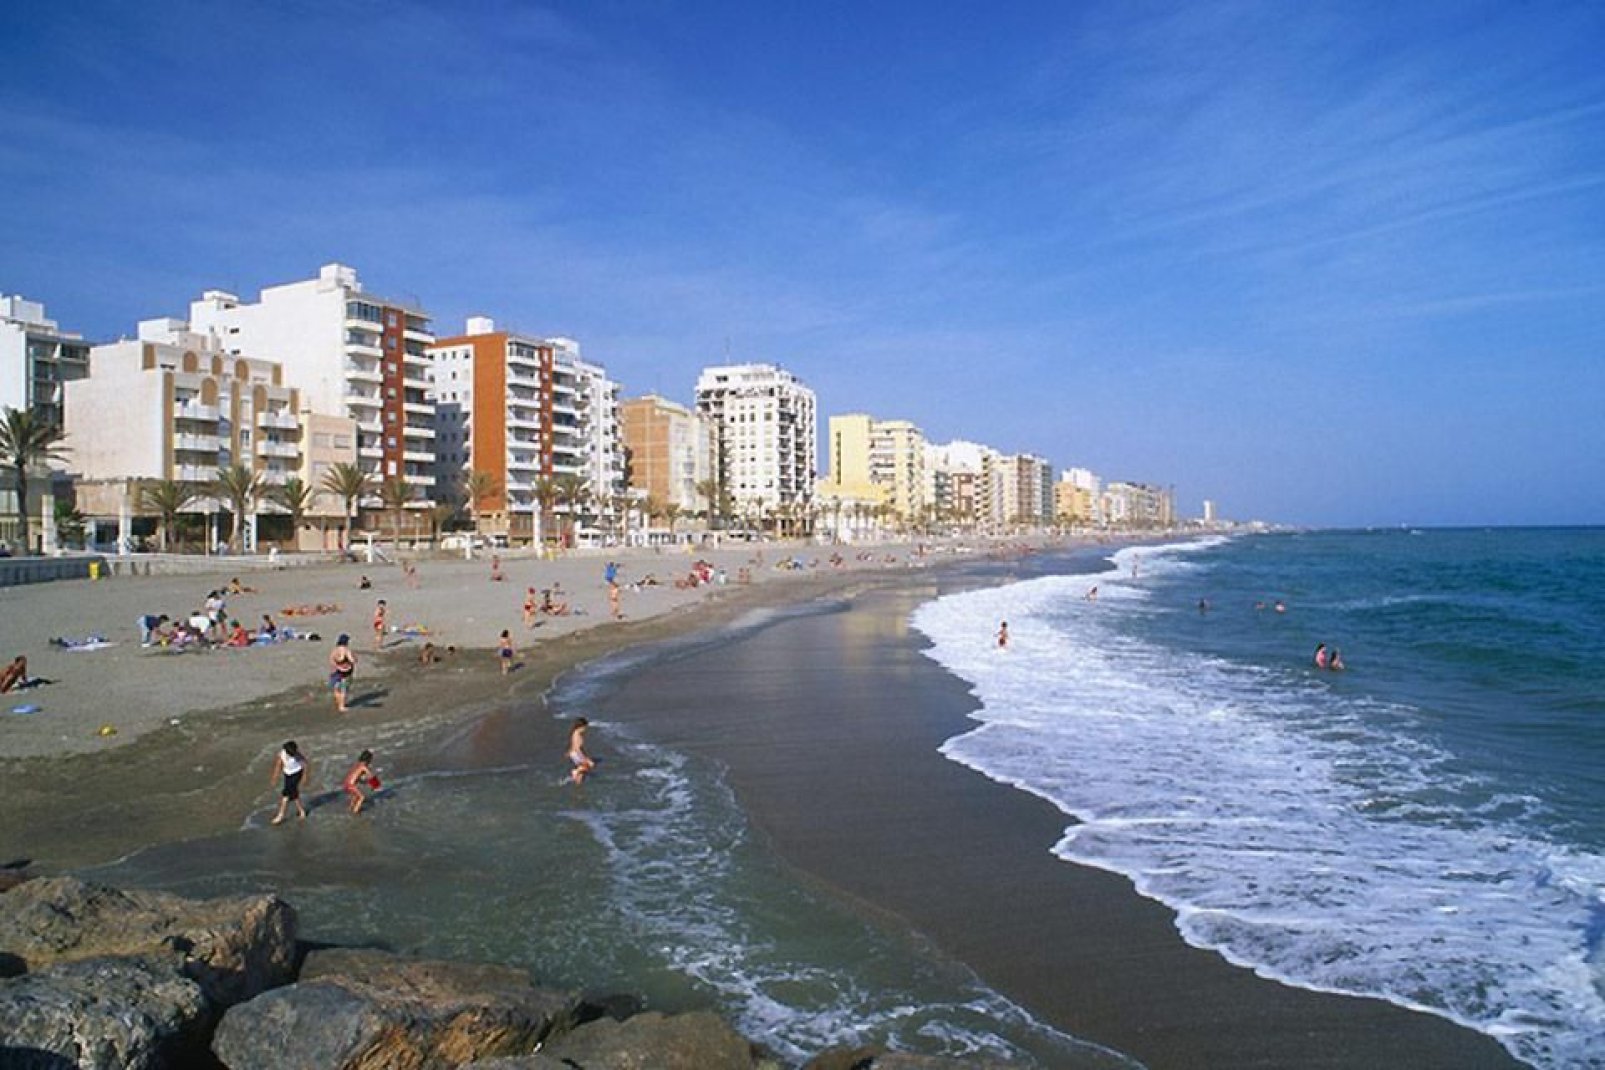 Almeria is known for its beaches of fine sand. It also has the largest naturist beach in Europe.